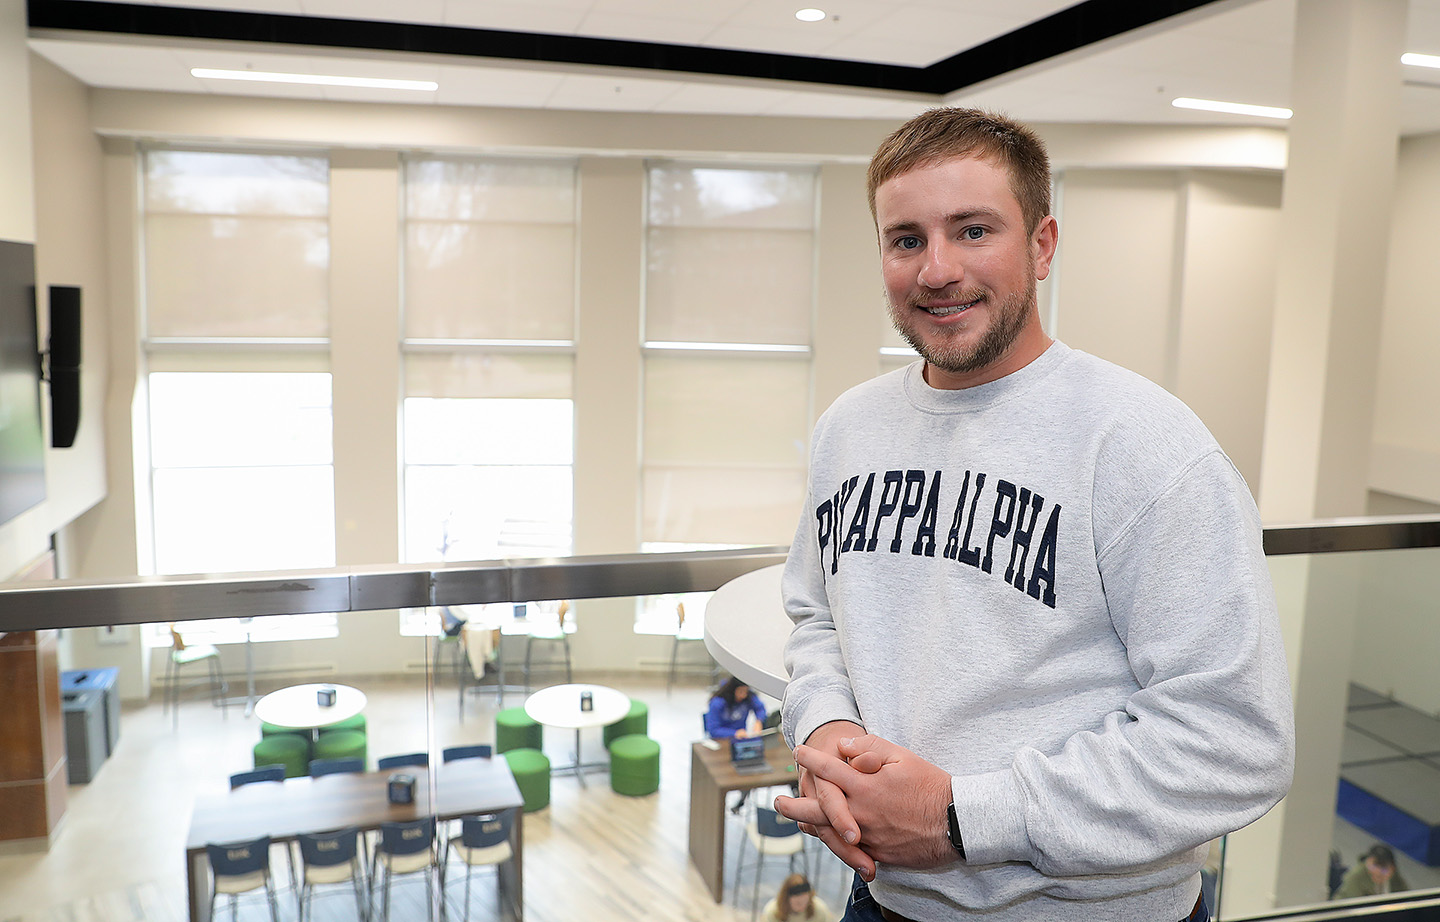 Nate Grimm took full advantage of his time at UNK. He excelled academically, posting a perfect 4.0 GPA, and was involved in numerous campus organizations and programs. (Photos by Erika Pritchard, UNK Communications)